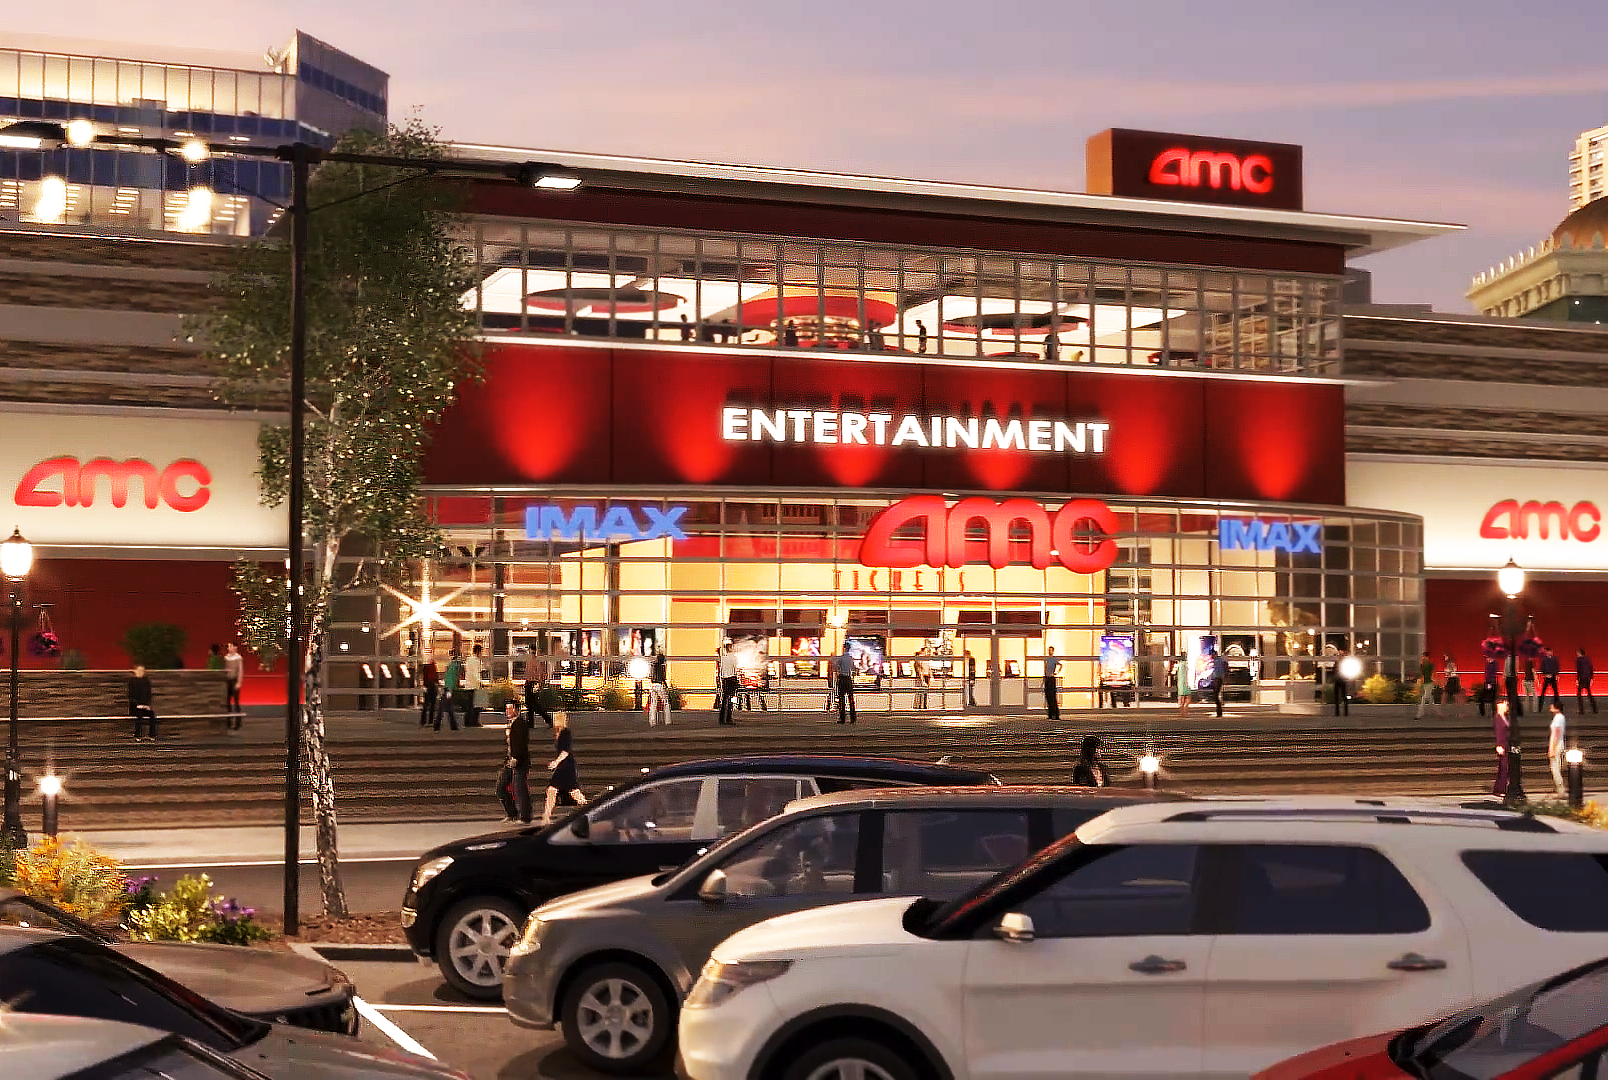 This is a 3D rendered image from Trinity's real estate renderings exhibiting the Summit Plaza Mall. This is a still shot of the AMC movie theatre that will reside at the Summit PLaza Mall. In the foreground, cars are displayed in the parking lot and people are walking along the sidewalks, sitting on benches, or walking into the theatre. The scene is set during the evening so street lights and light on the building are simulated inside of 3D software. This shot demonstrates all of the architectural details that the building will consist of. The camera pans across the area while people walk around the mall going about there day to day life.